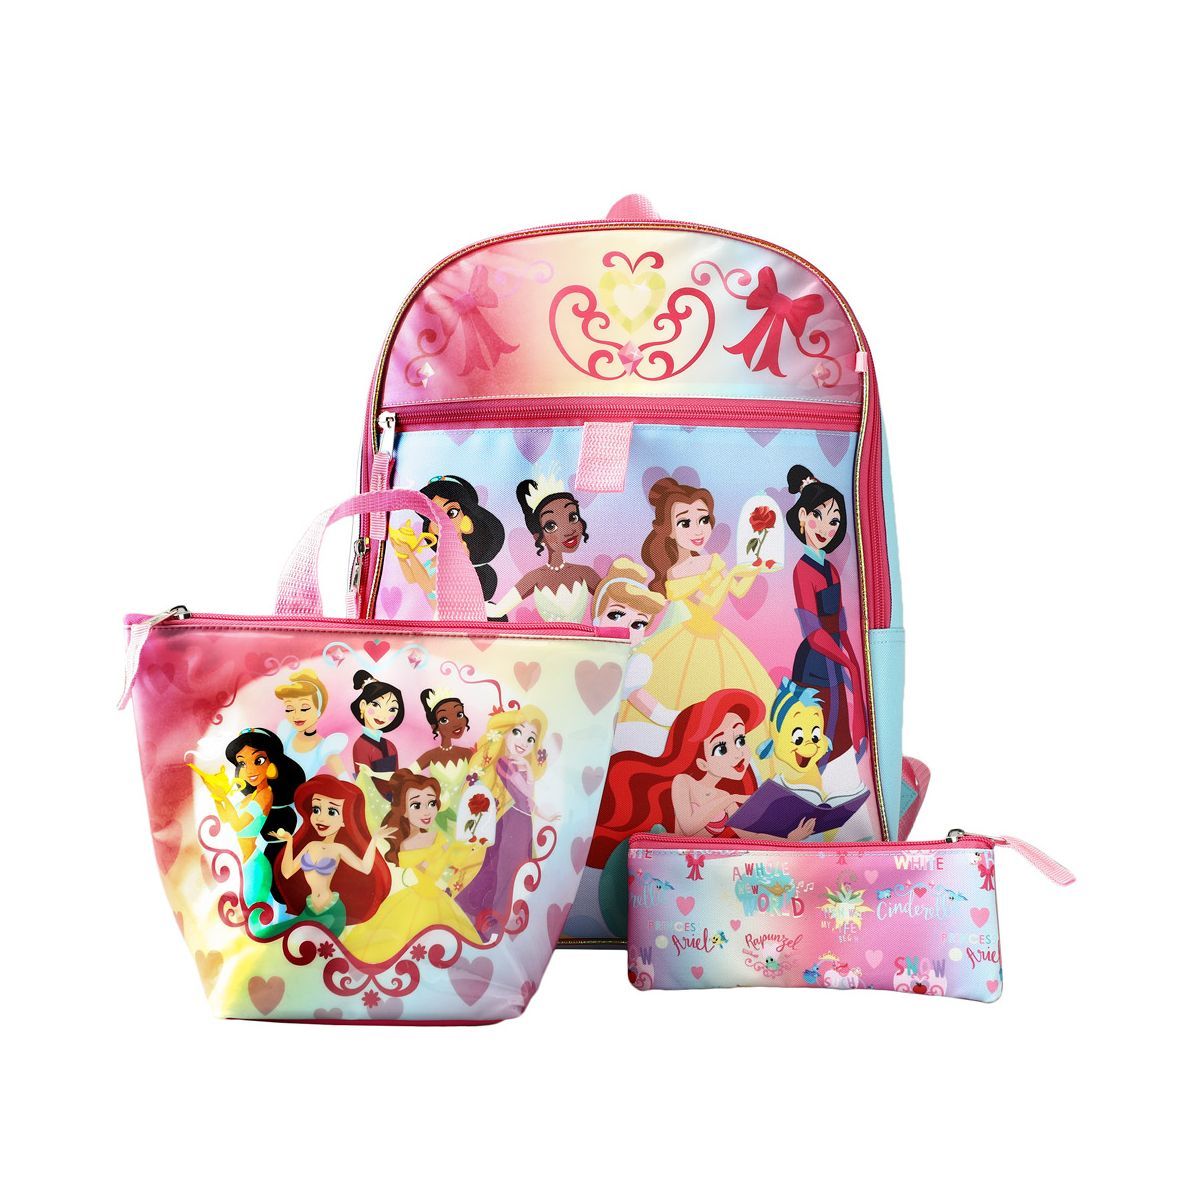 Disney Princesses Backpack With Lunch box set for kids 6 Piece | Target